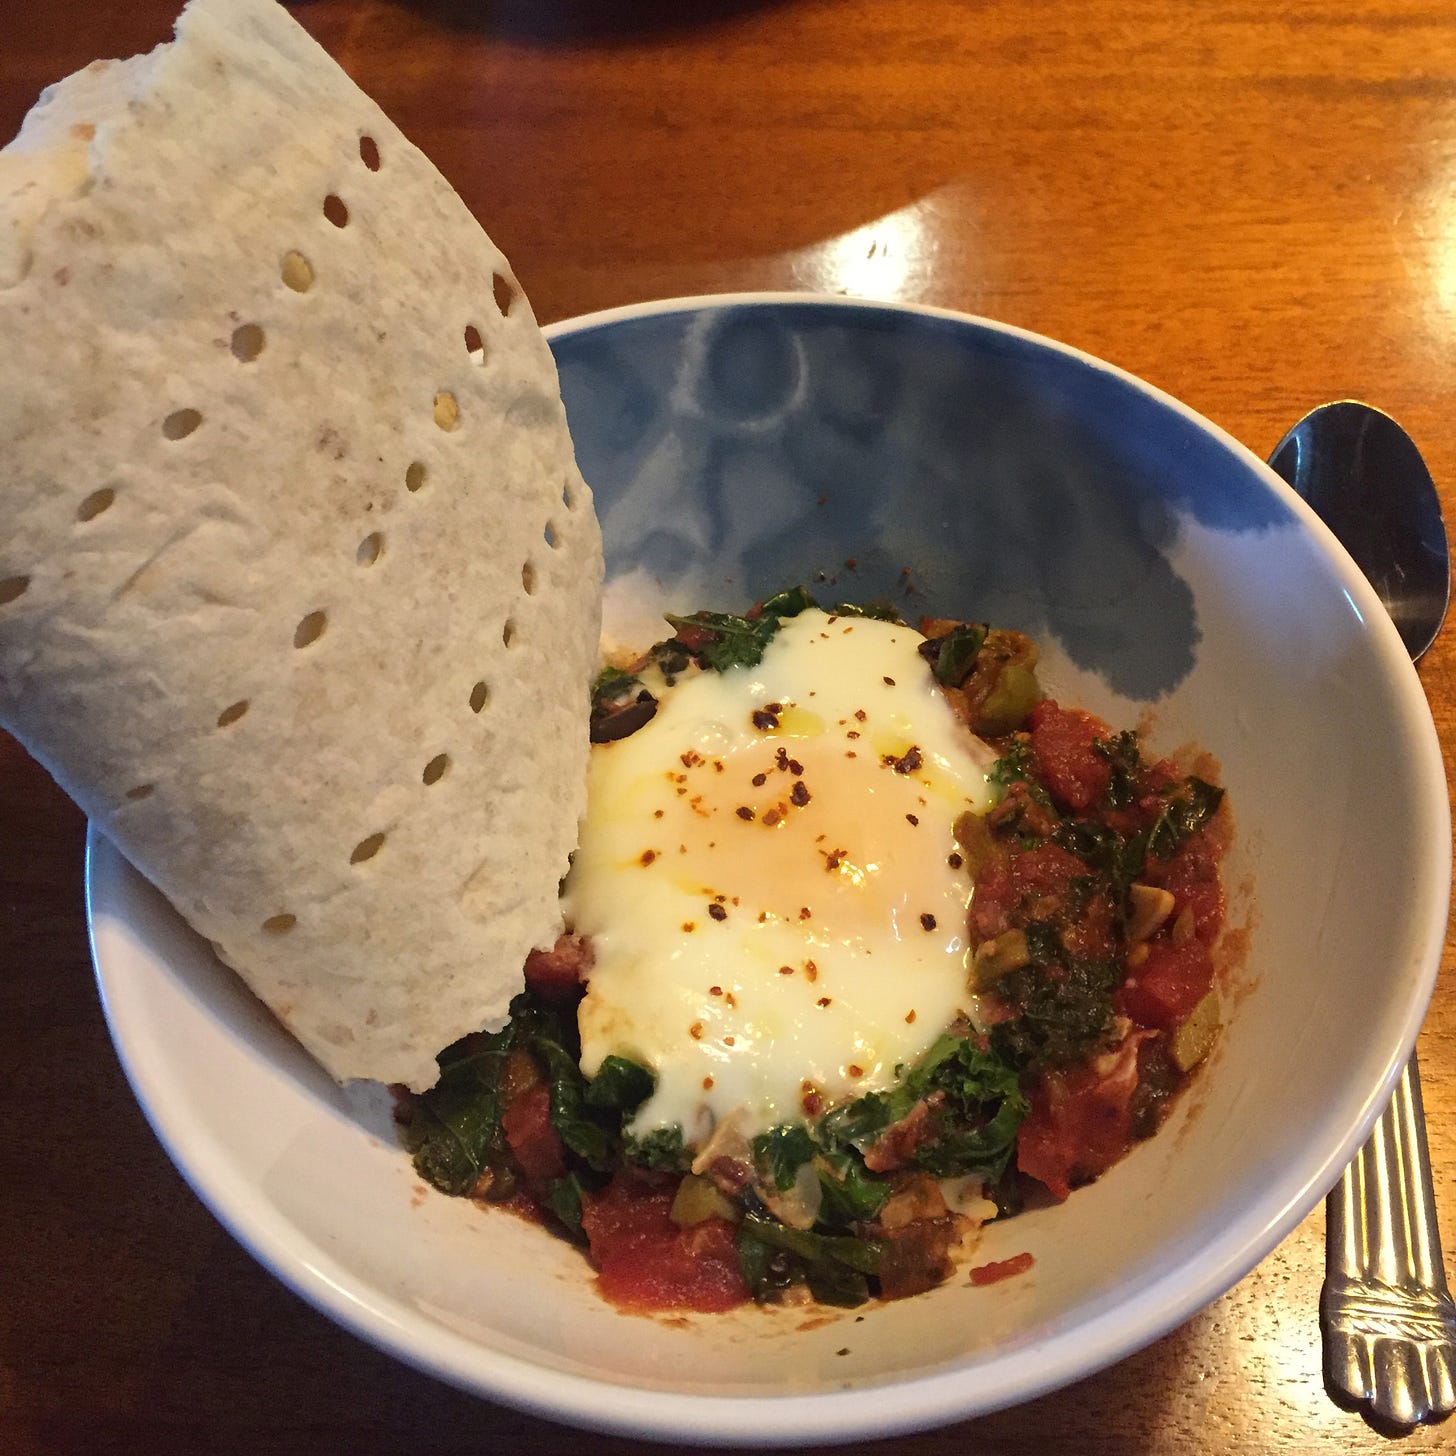 A white and blue bowl with the puttanesca and a poached egg dusted with chili flakes. At the edge of the bowl is a large slice of flatbread.